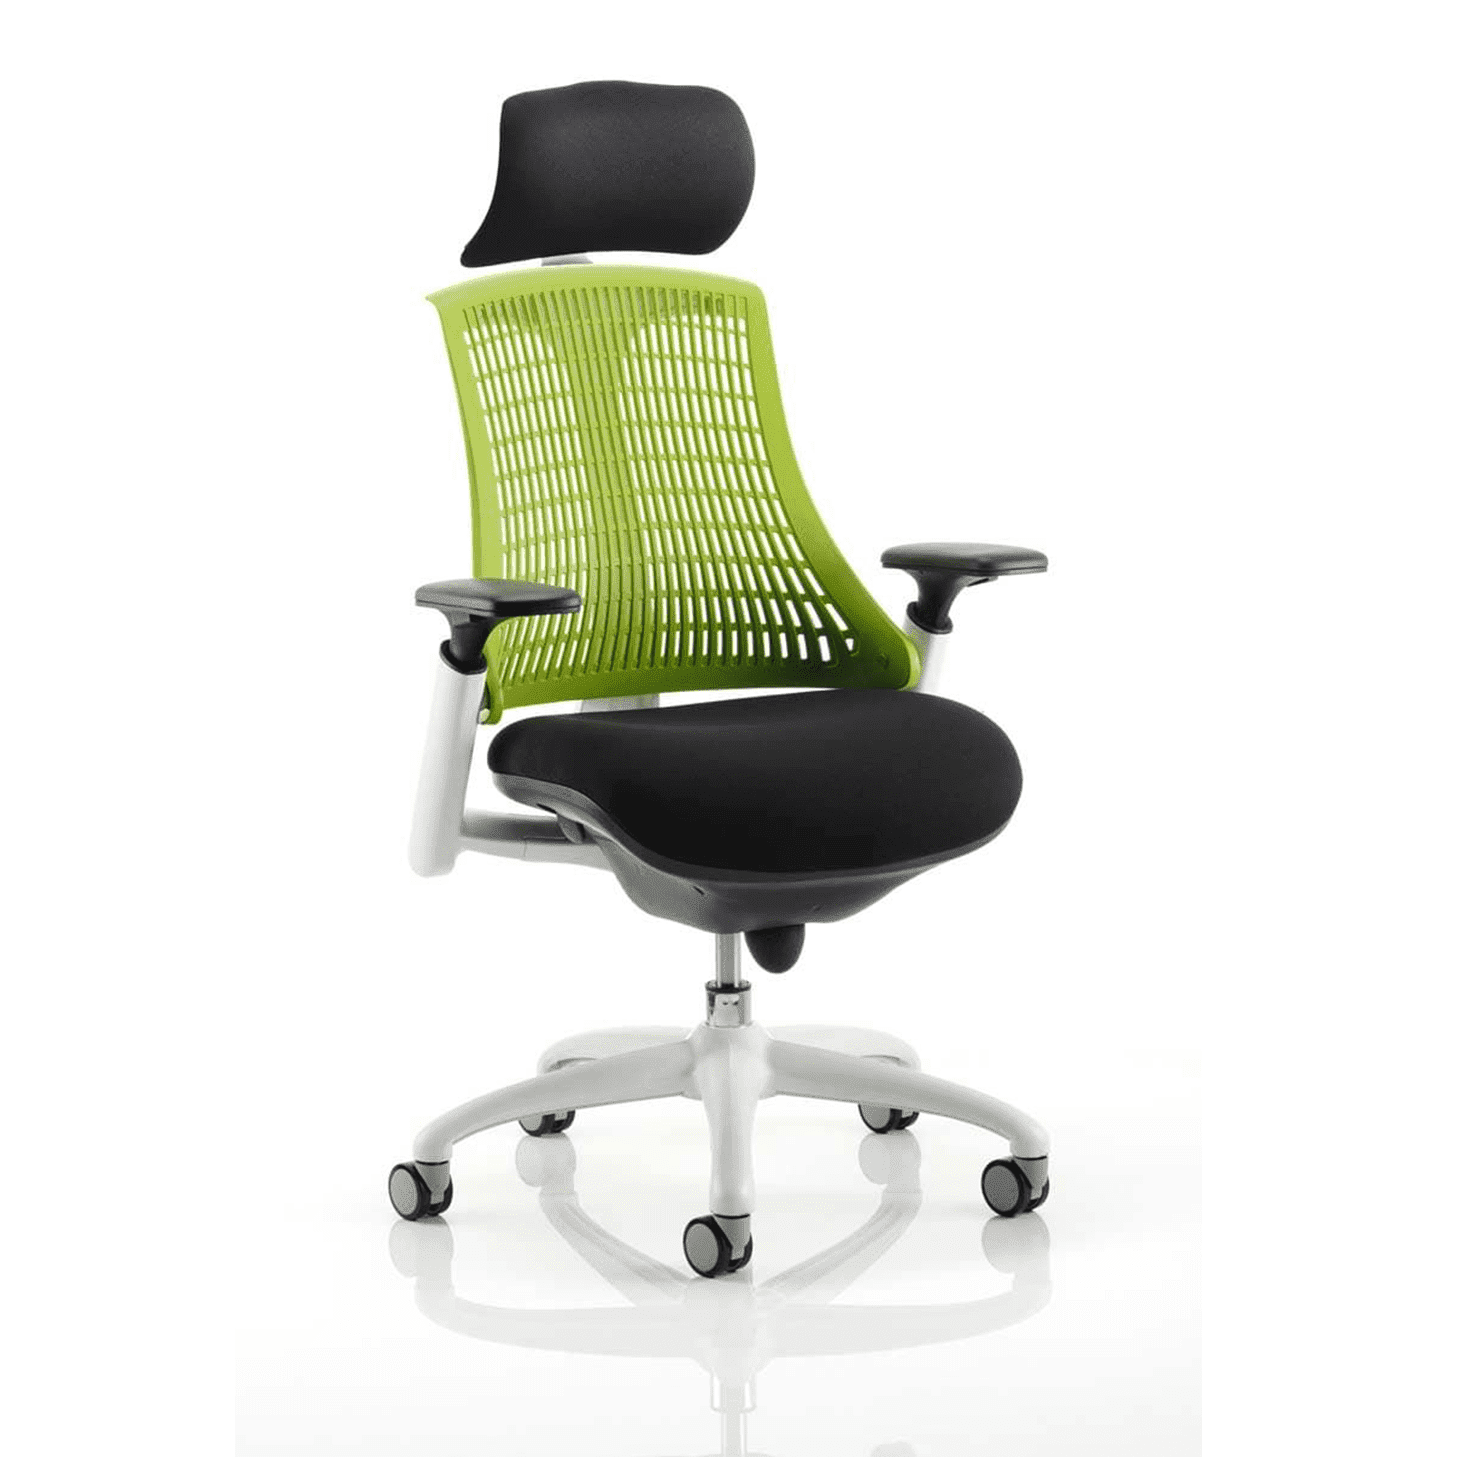 Flex Medium Back Task Operator Office Chair - White Frame, Mesh & Fabric, Adjustable Arms, 8hr Usage, 110kg Capacity (Flat Packed)